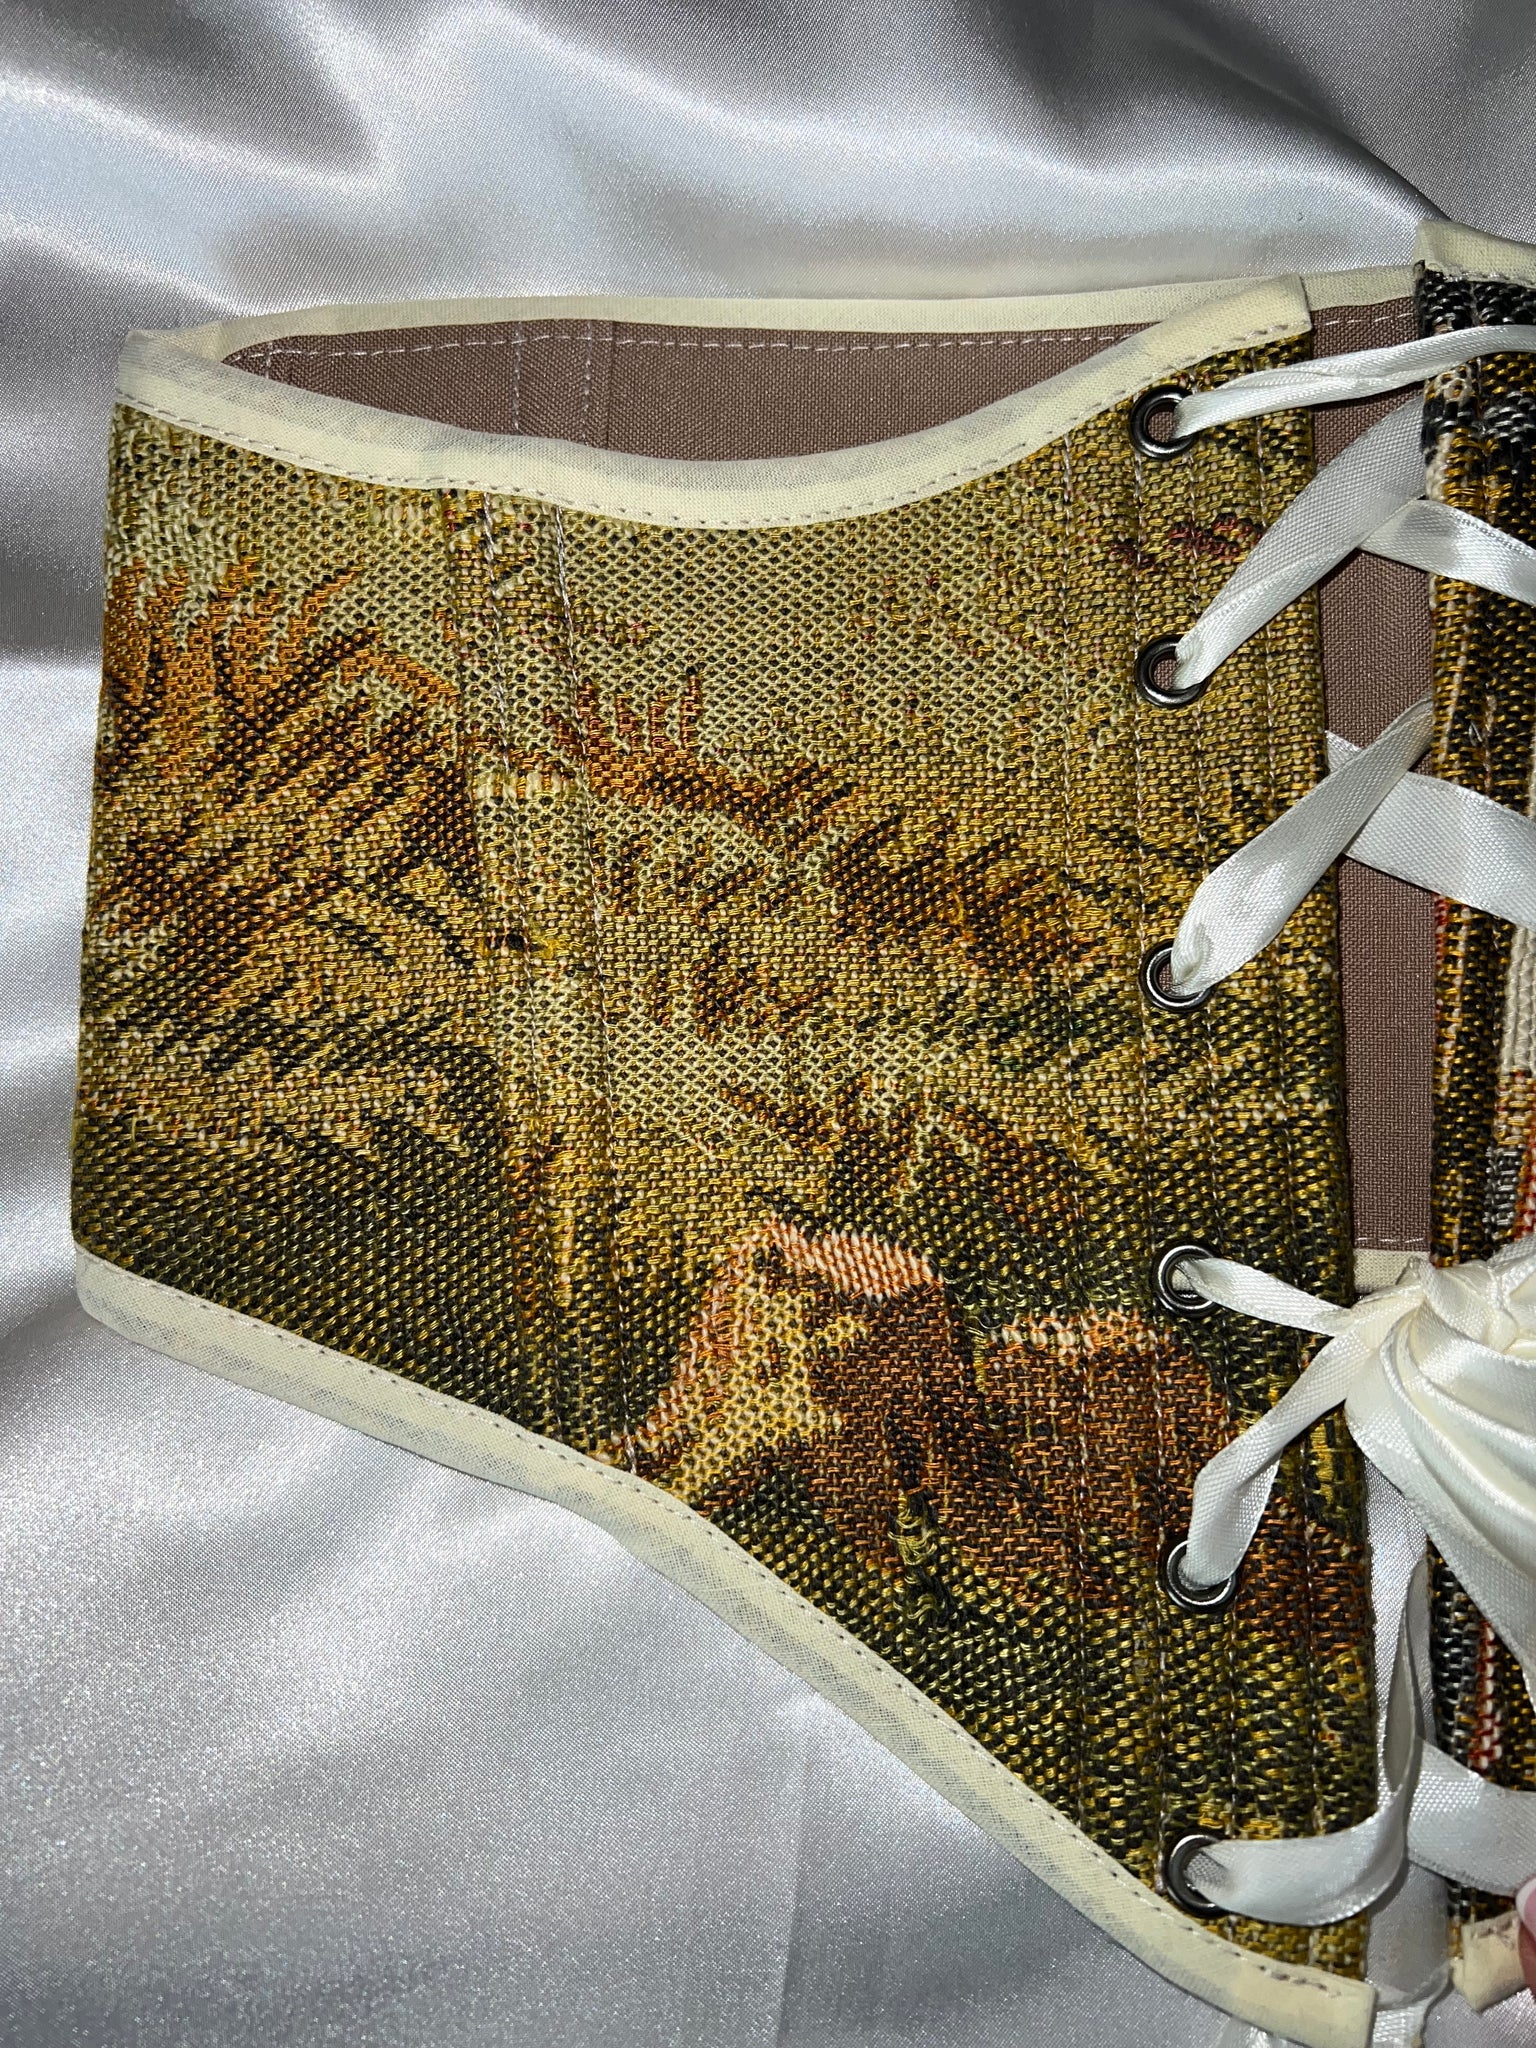 Vintage Tapestry Lace-up Corset Belt, "Forest Sunlight" pattern, Size XS-S (US 0-4)